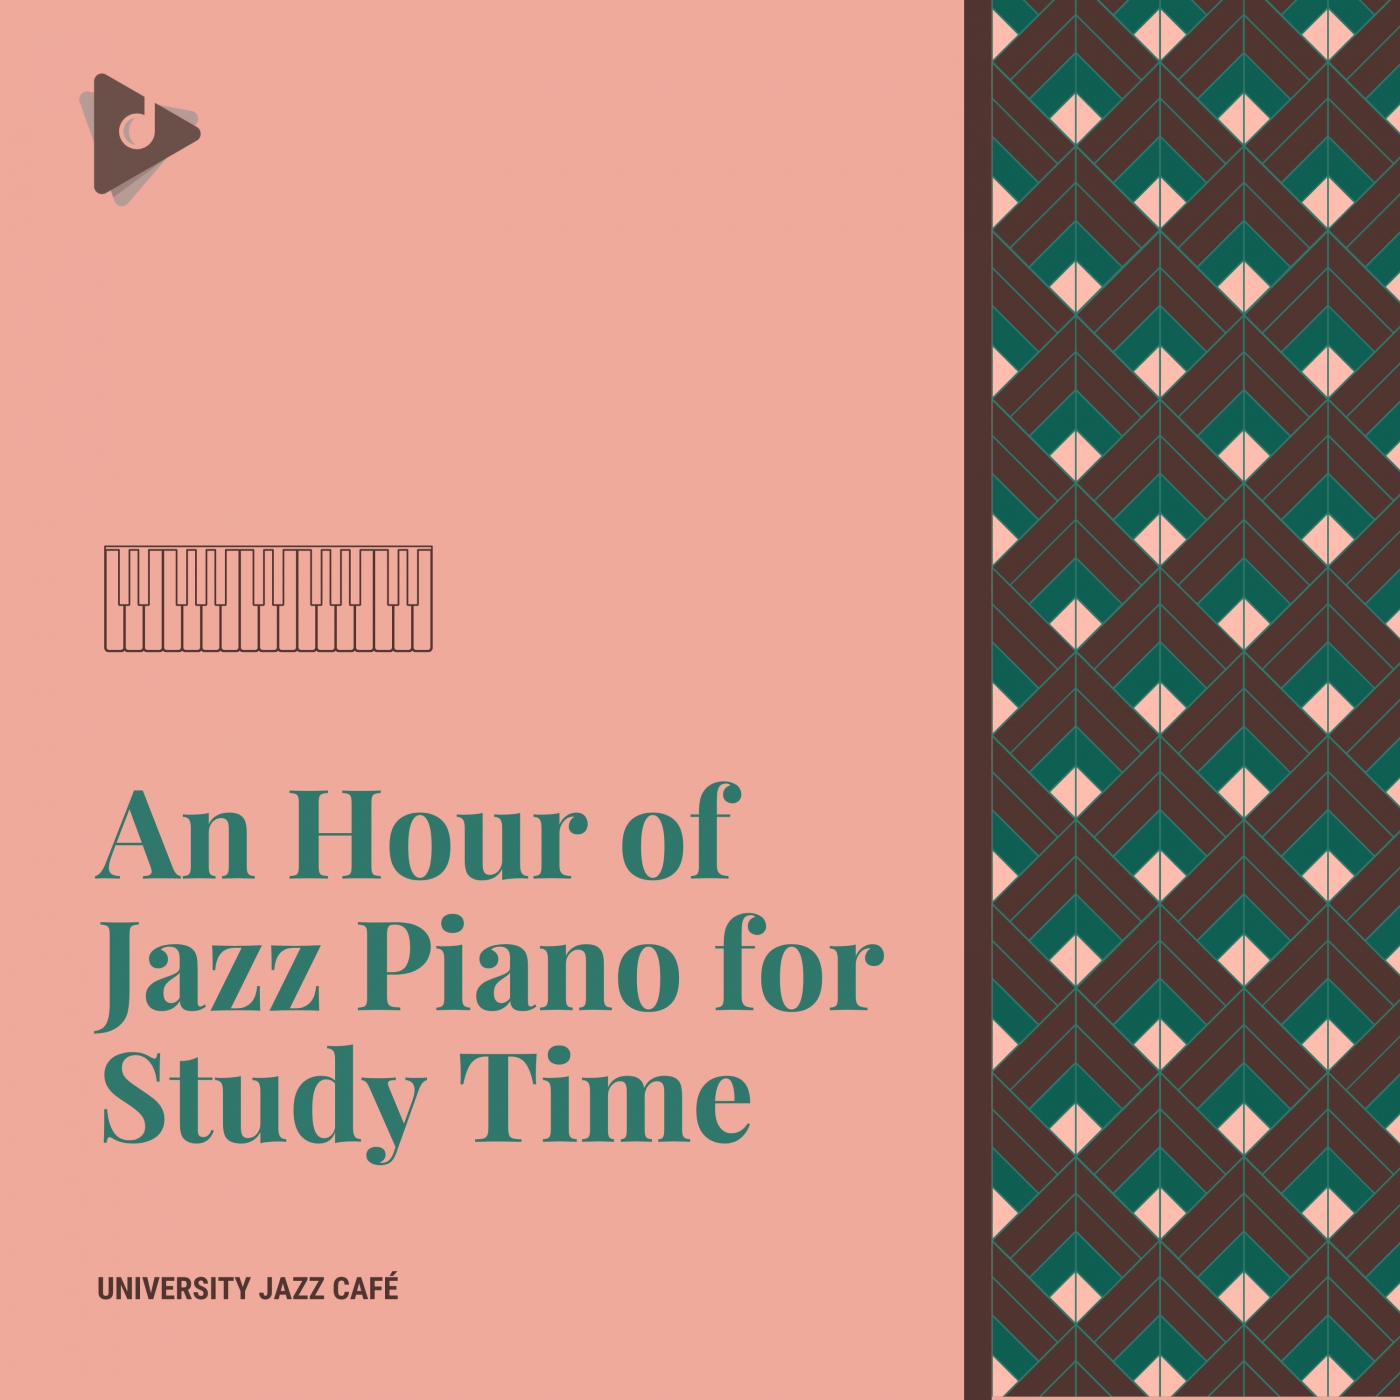 An Hour of Jazz Piano for Study Time